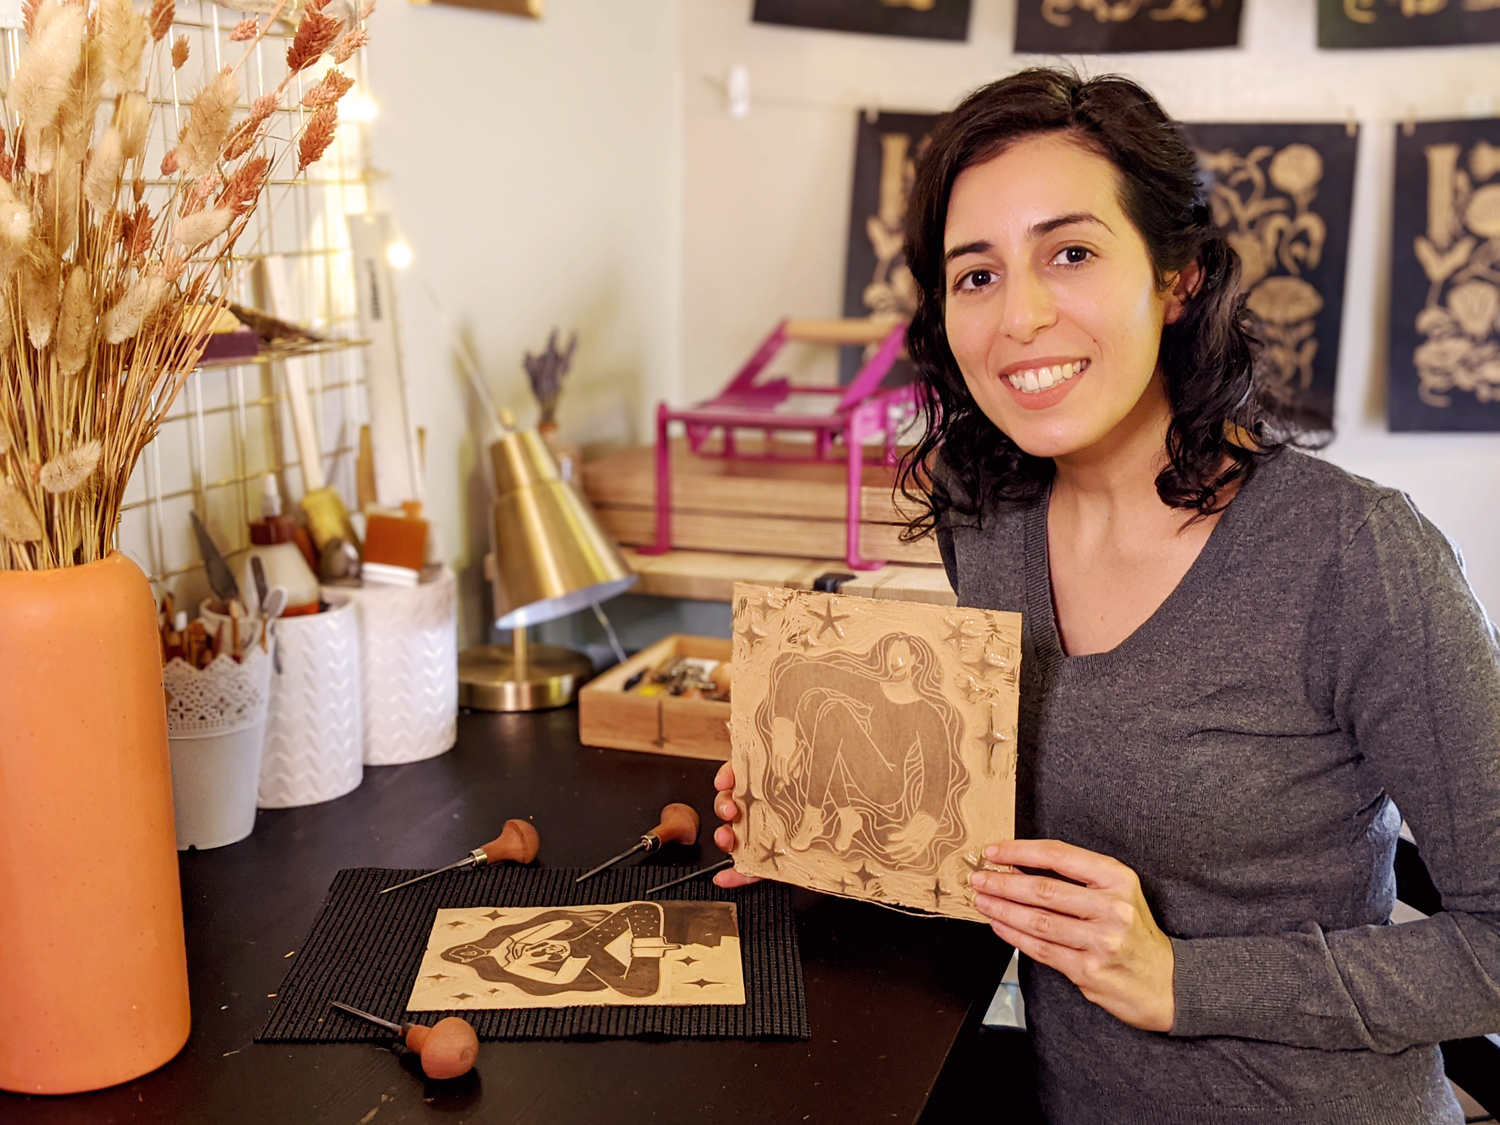 A picture of Booba Prints creator sitting at her work station, carving tools on the desk, holding a linoleum block featuring a woman design